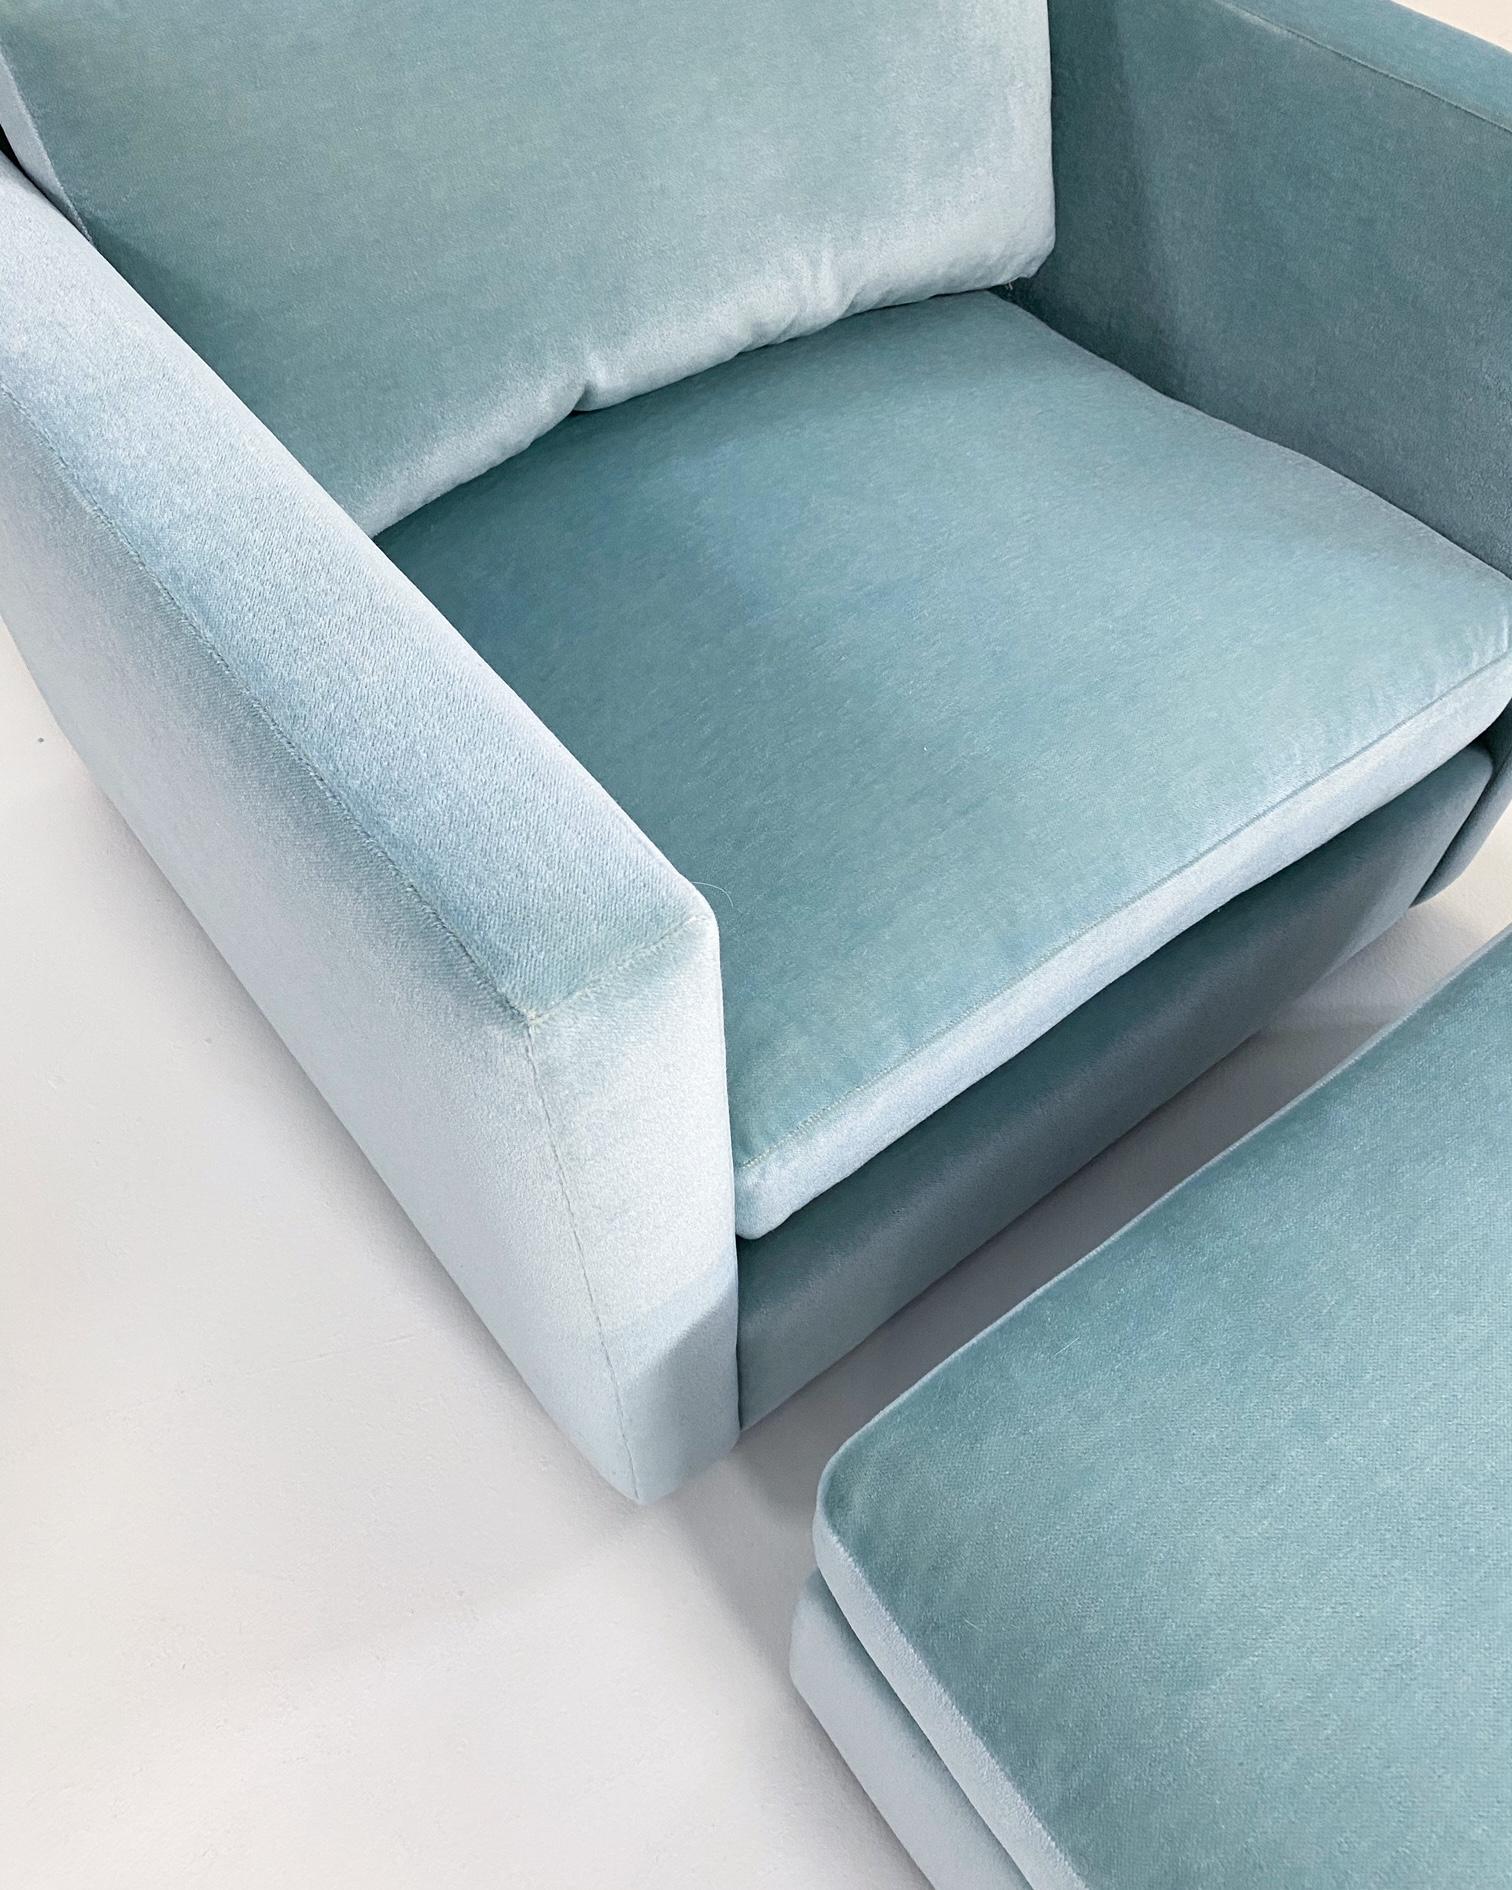 We collected the Charles Pfister for Knoll club chair for its great lines. A simple, square, large lounge. Nothing better. We didn't have the matching ottoman so our incredible upholstery team created one. A cool Pierre Frey mohair velvet in Celadon